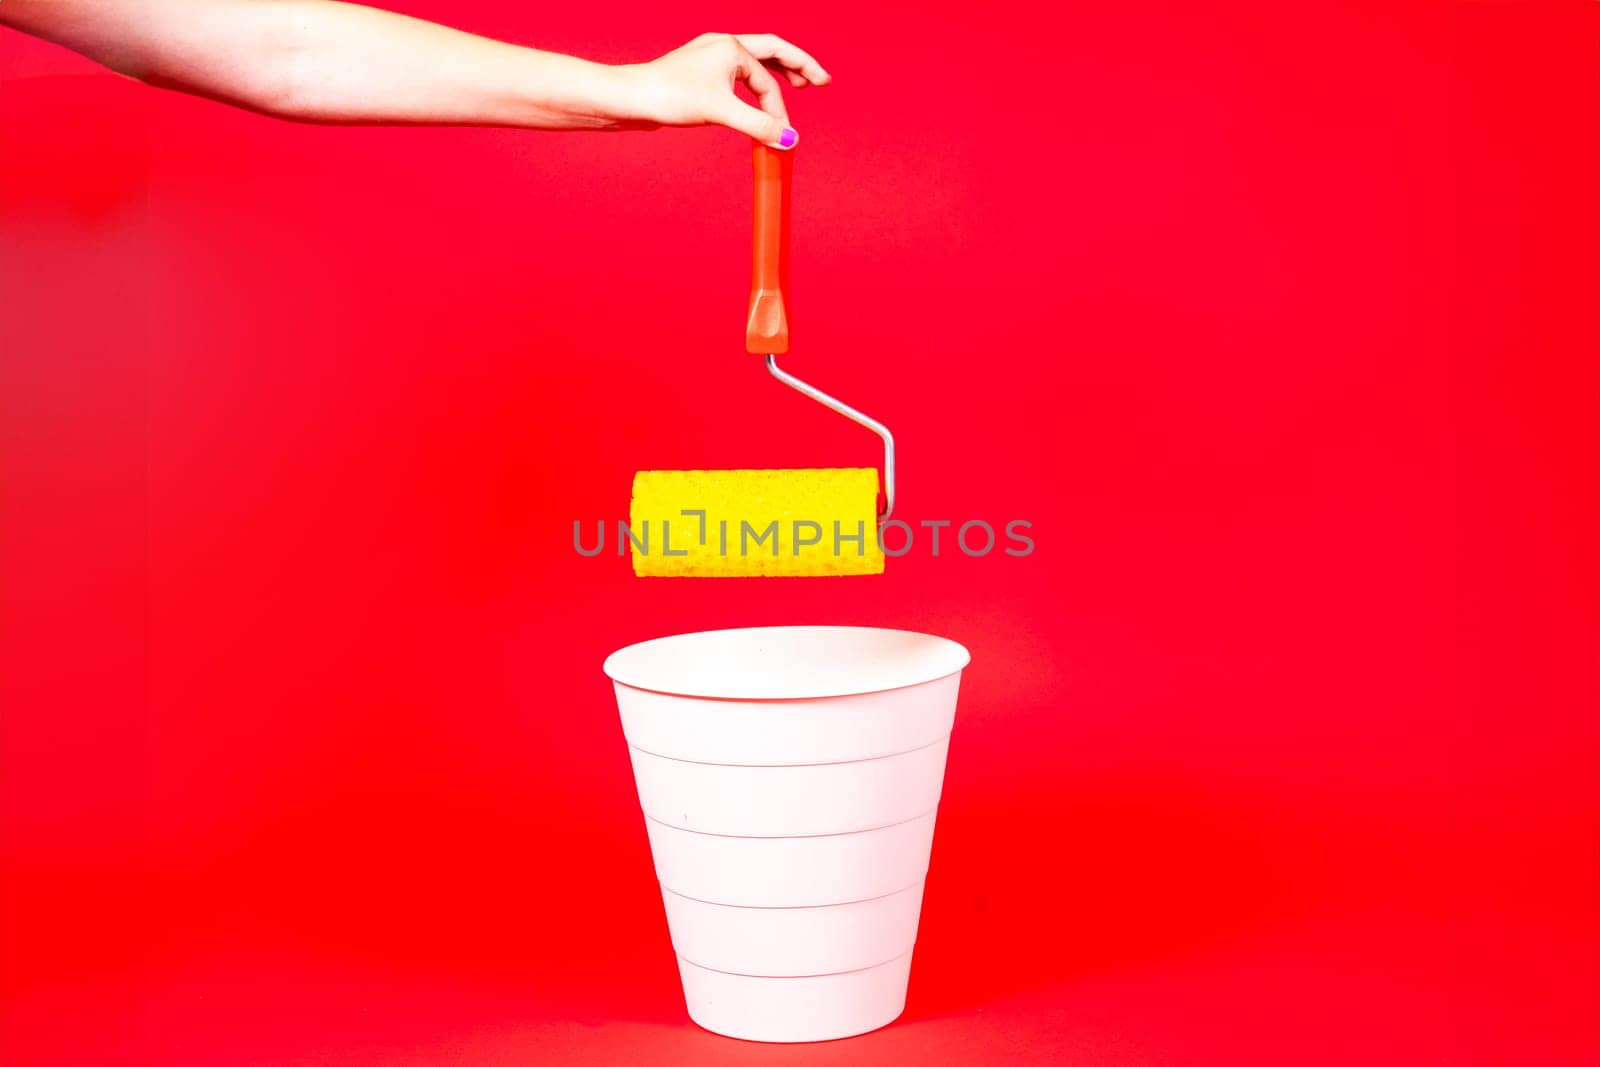 Construction roller is thrown into the trash on a red background by Zelenin